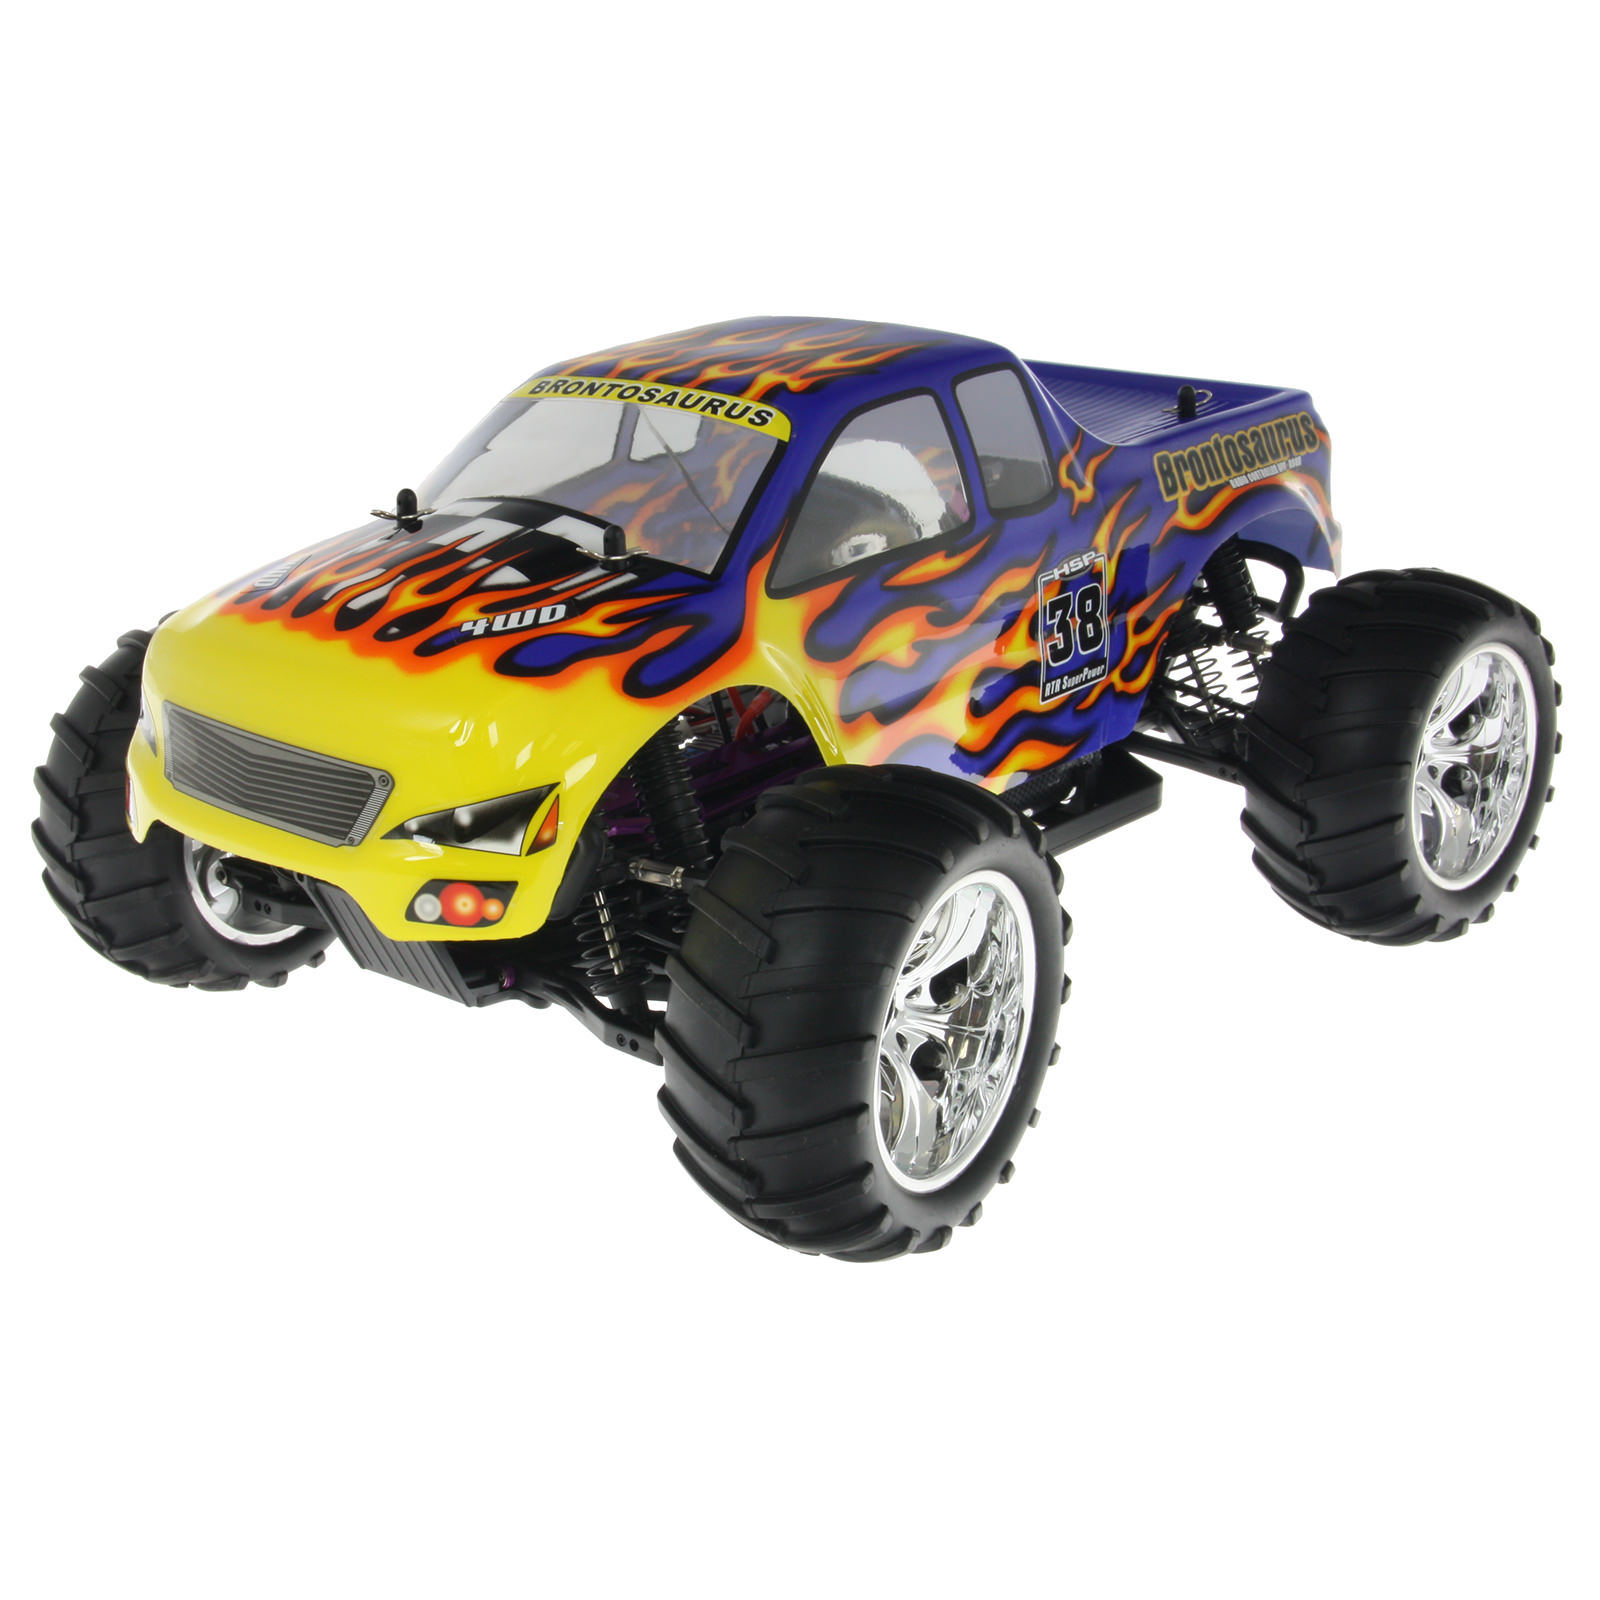 1/10 Scale 4WD Ep Hsp Car